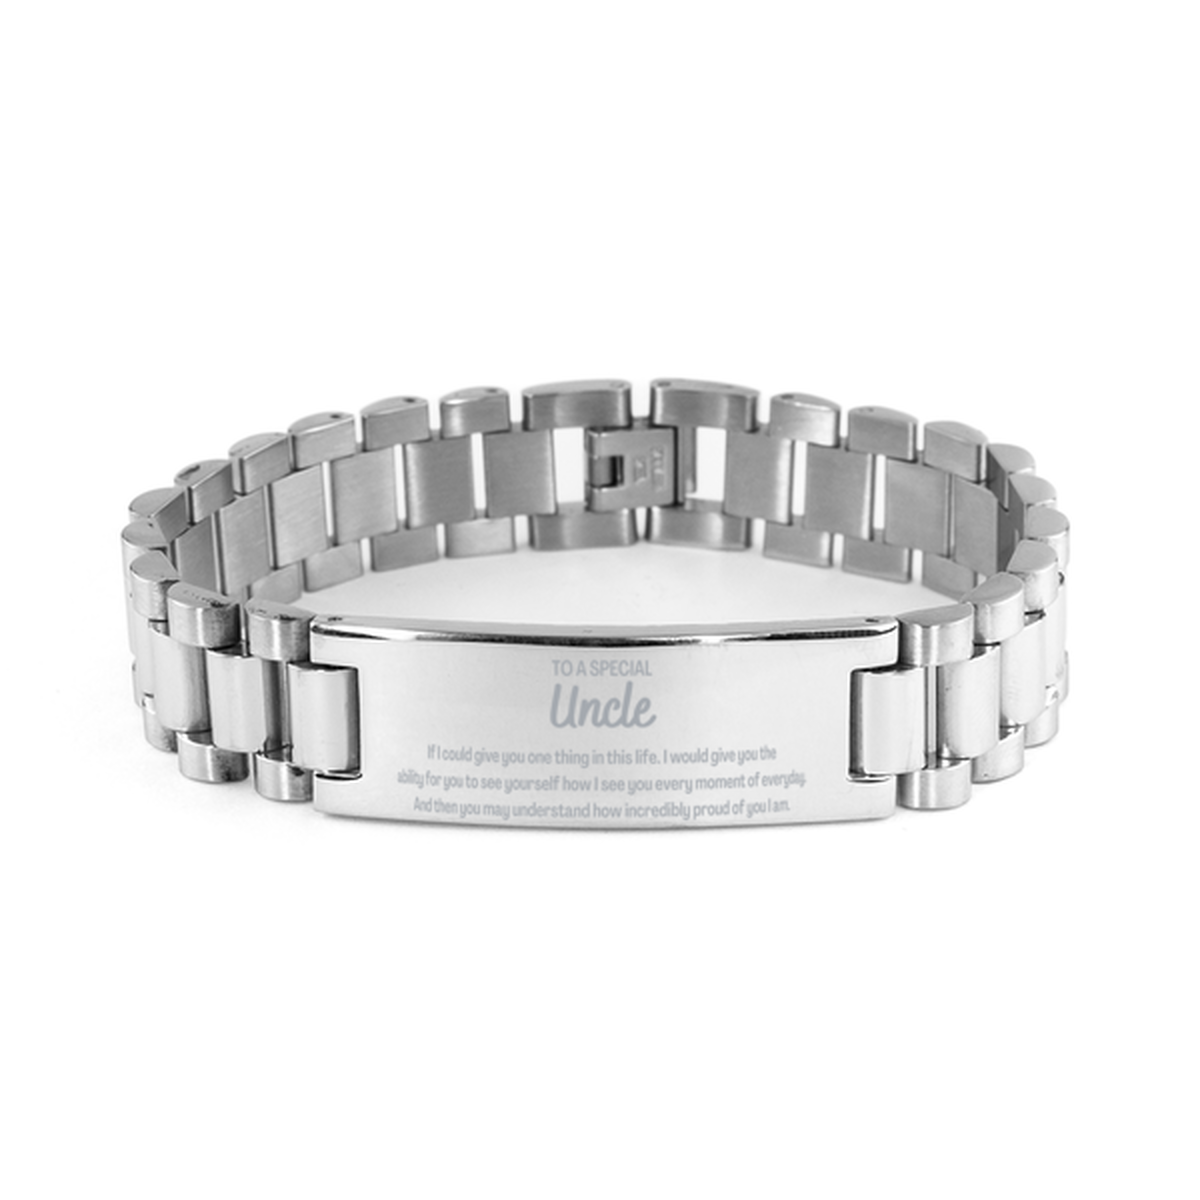 To My Uncle Ladder Stainless Steel Bracelet, Gifts For Uncle Engraved, Inspirational Gifts for Christmas Birthday, Epic Gifts for Uncle To A Special Uncle how incredibly proud of you I am